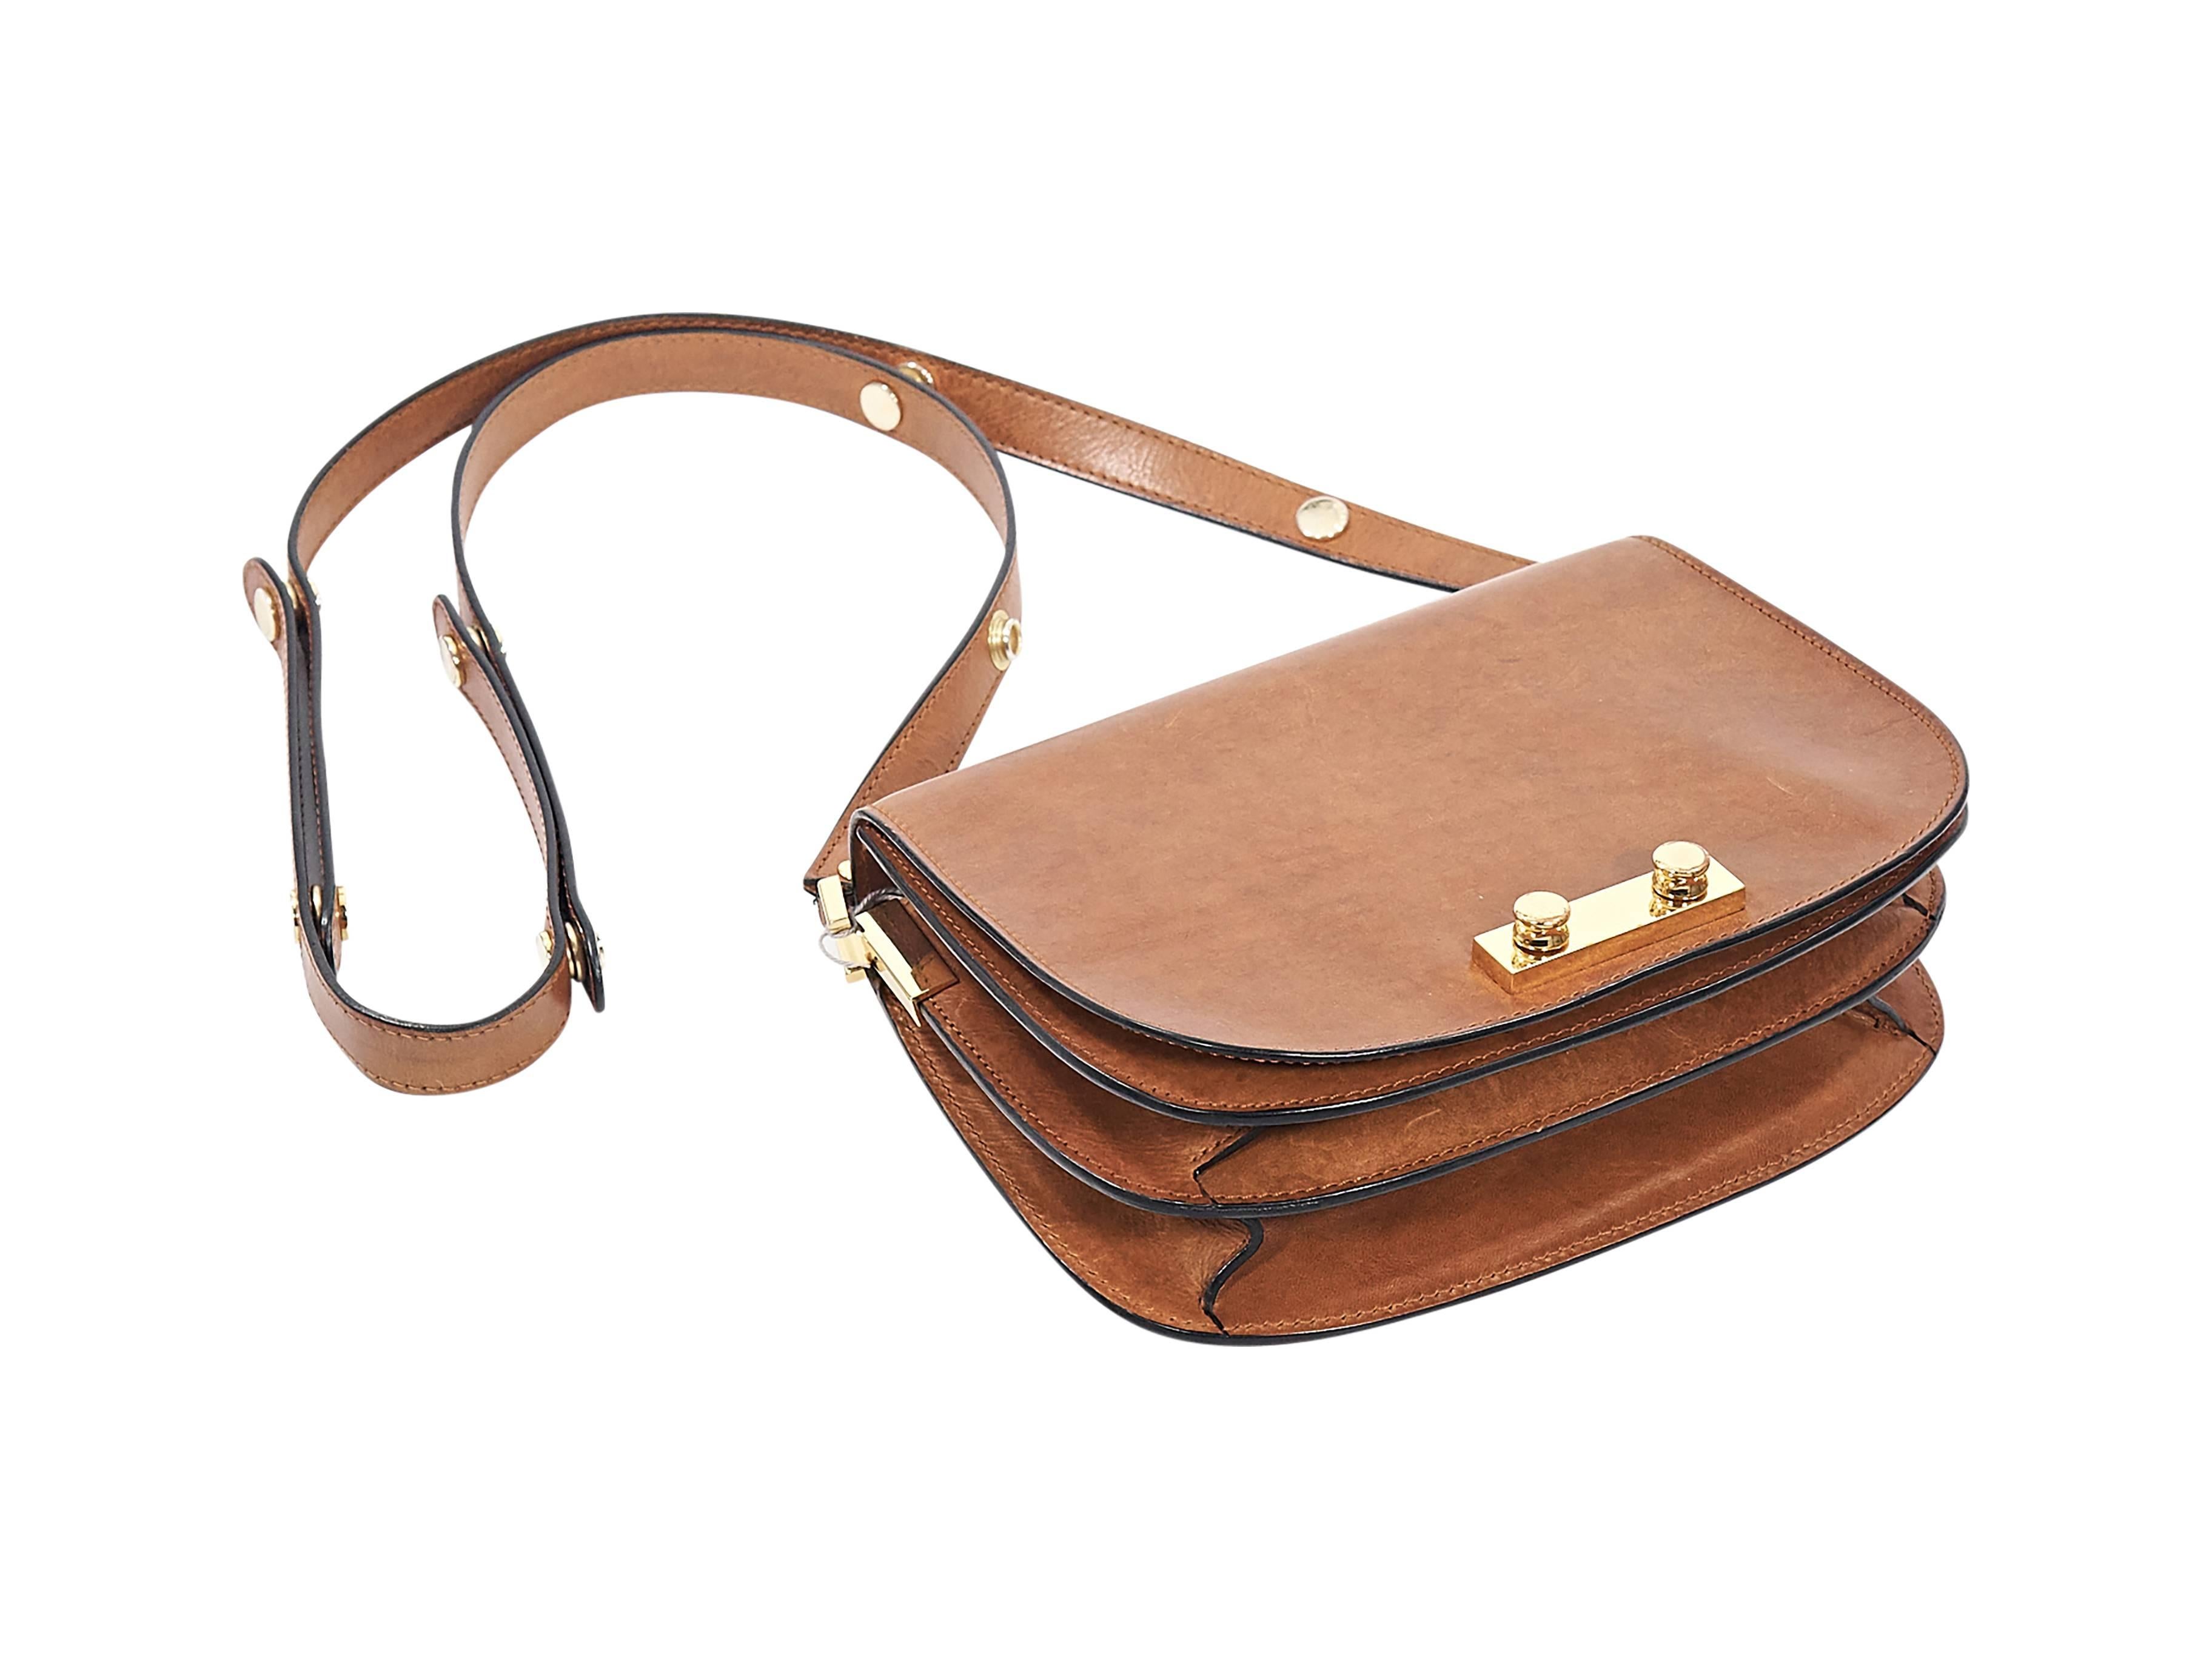 Product details:  Tan leather crossbody bag by Marni.  Adjustable crossbody strap.  Front flap.  Lined interior with inner compartments and slide pocket.  Goldtone hardware.  9